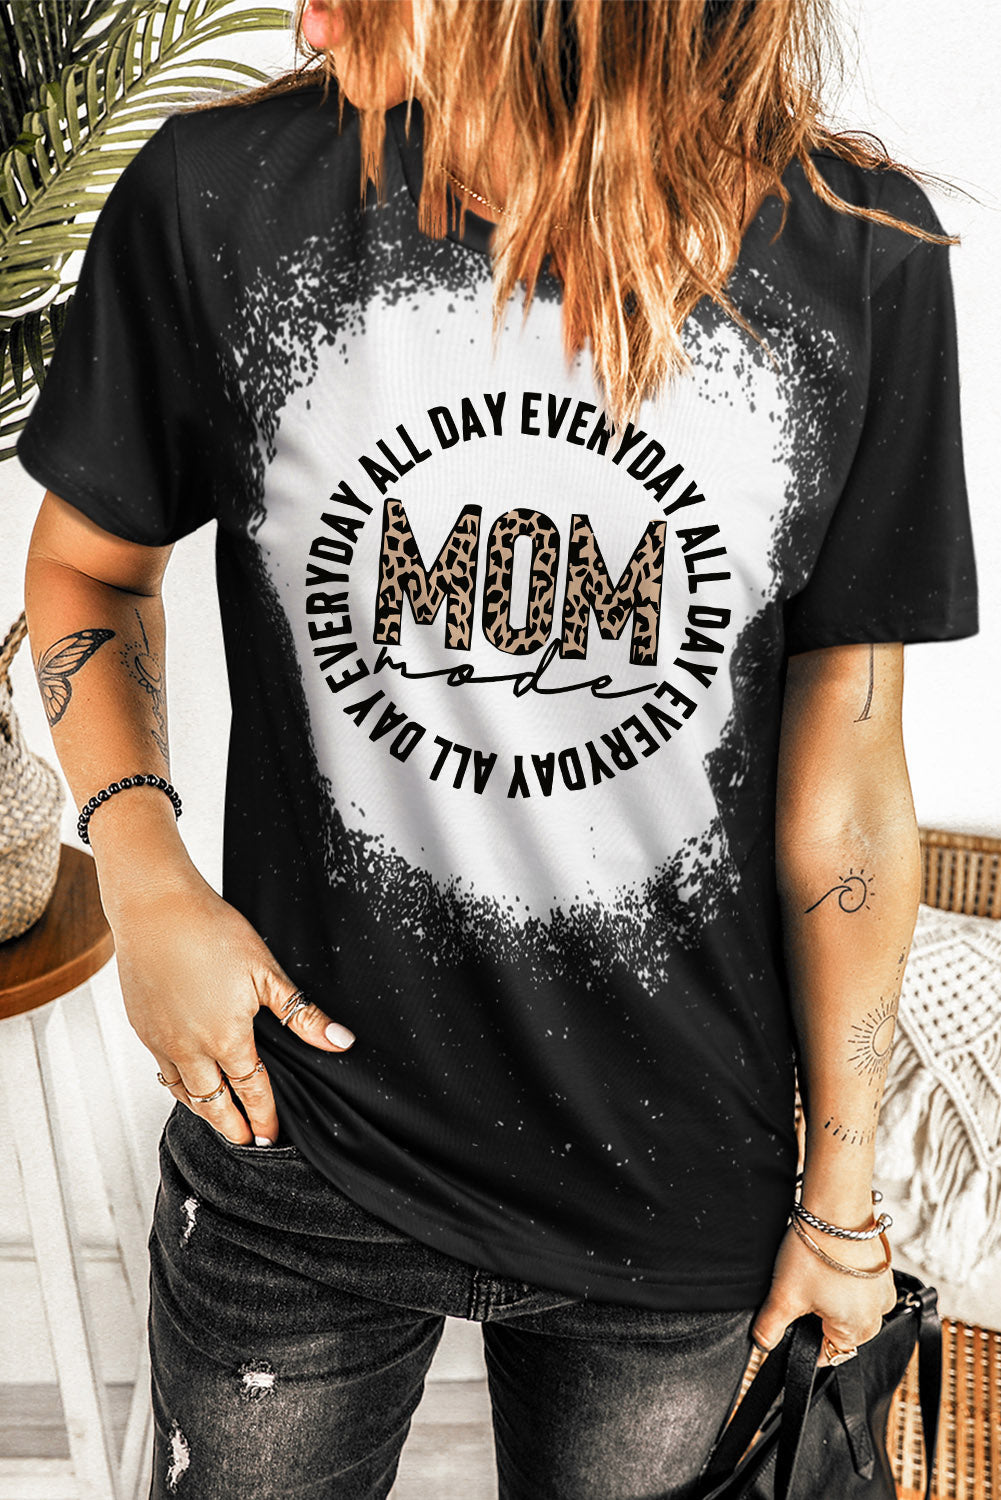 LC25220779-2-S, LC25220779-2-M, LC25220779-2-L, LC25220779-2-XL, Black Mama Vintage Bleached T-Shirt Women Mom Leopard Short Sleeve Graphic Tee